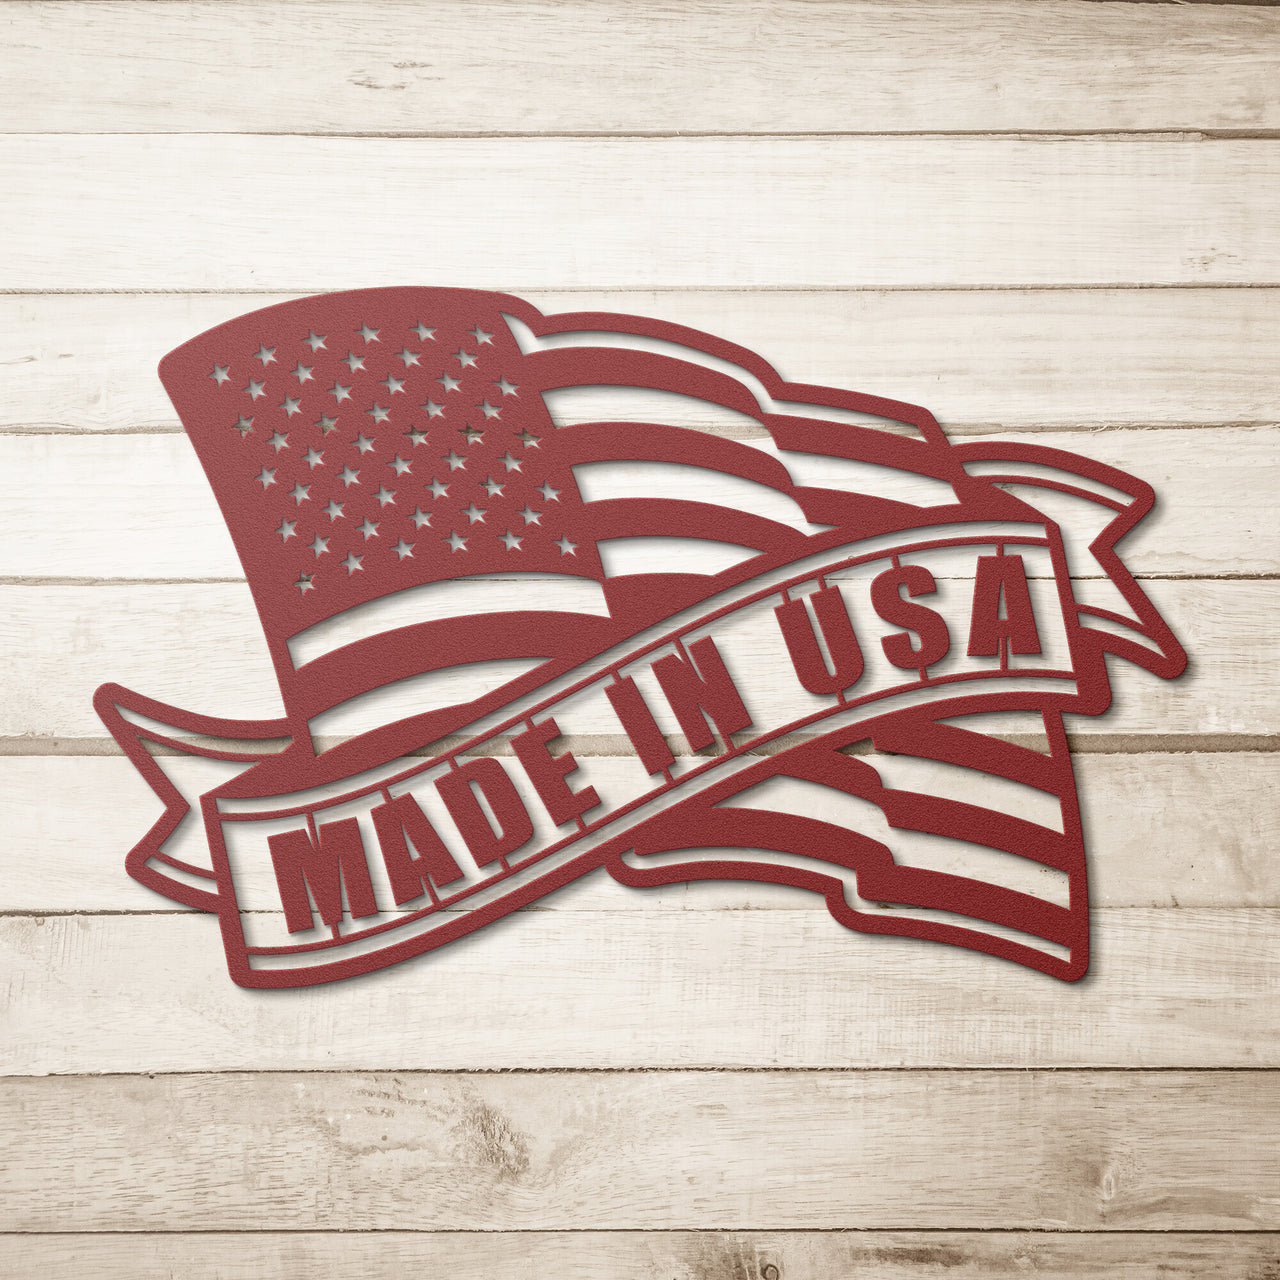 Wall Art of Flag with banner, Made in USA. Made of steel and powder coated.